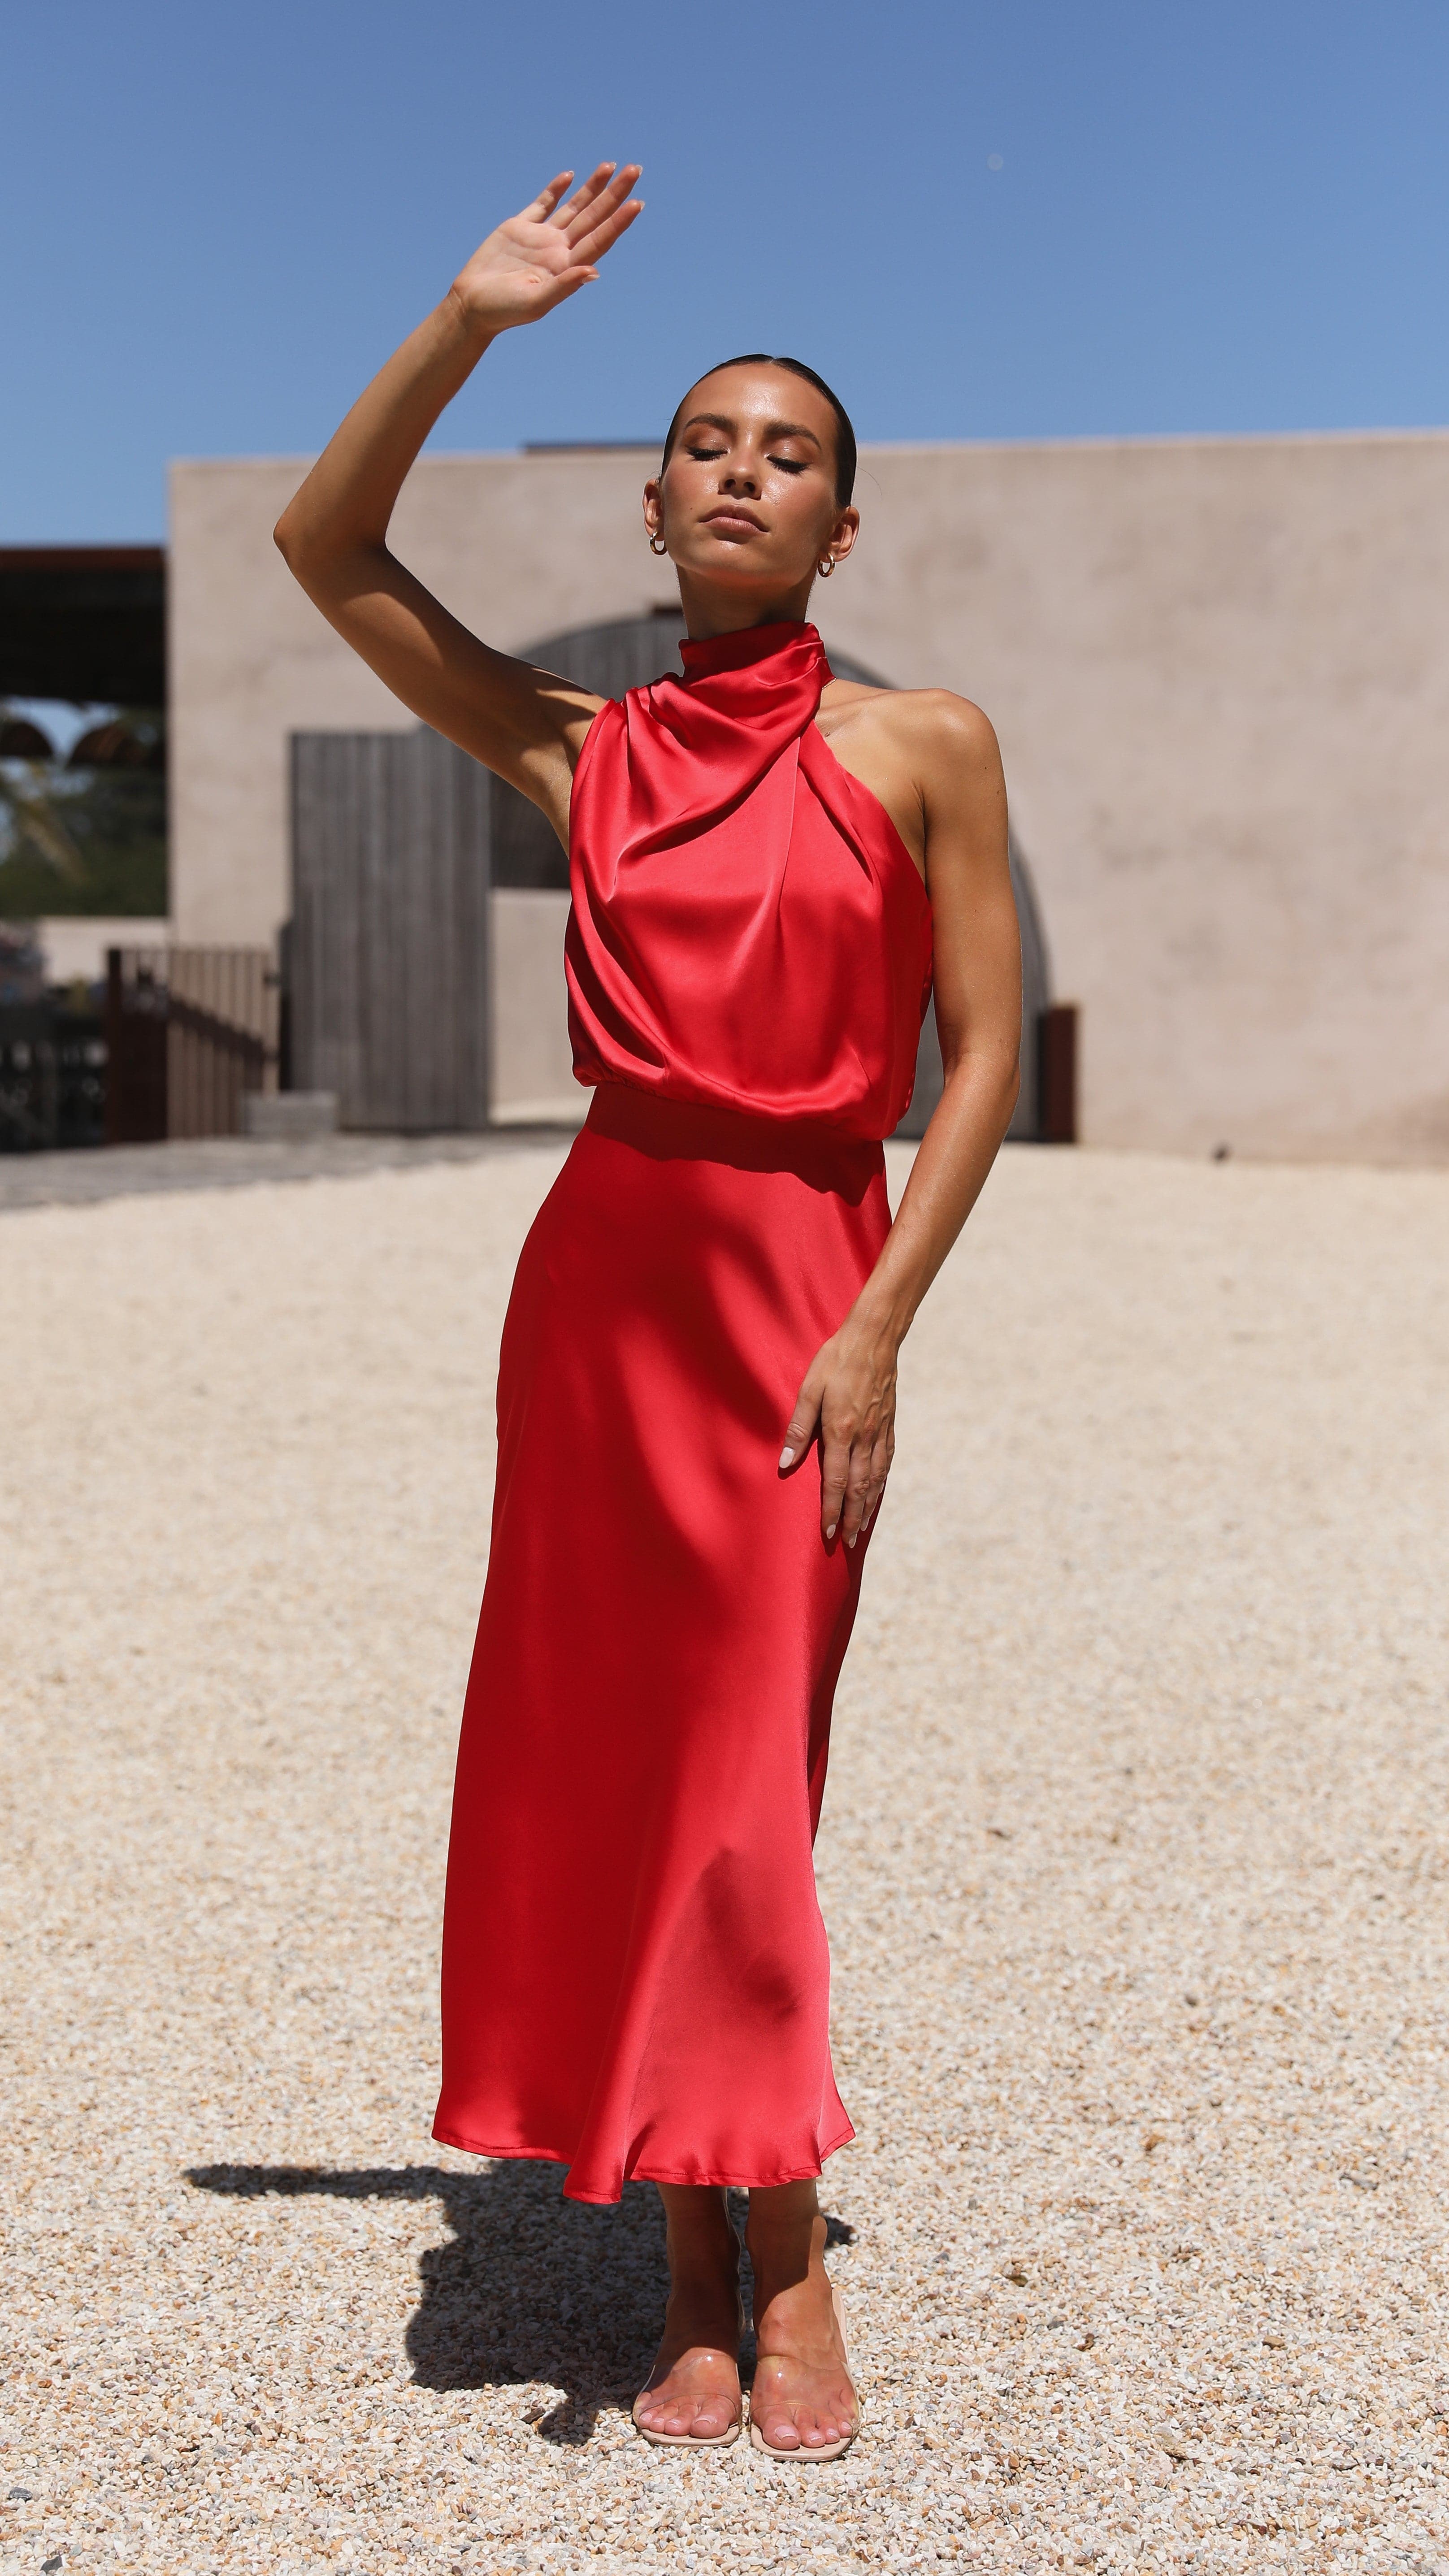 Esther Maxi Dress - Red - Billy J